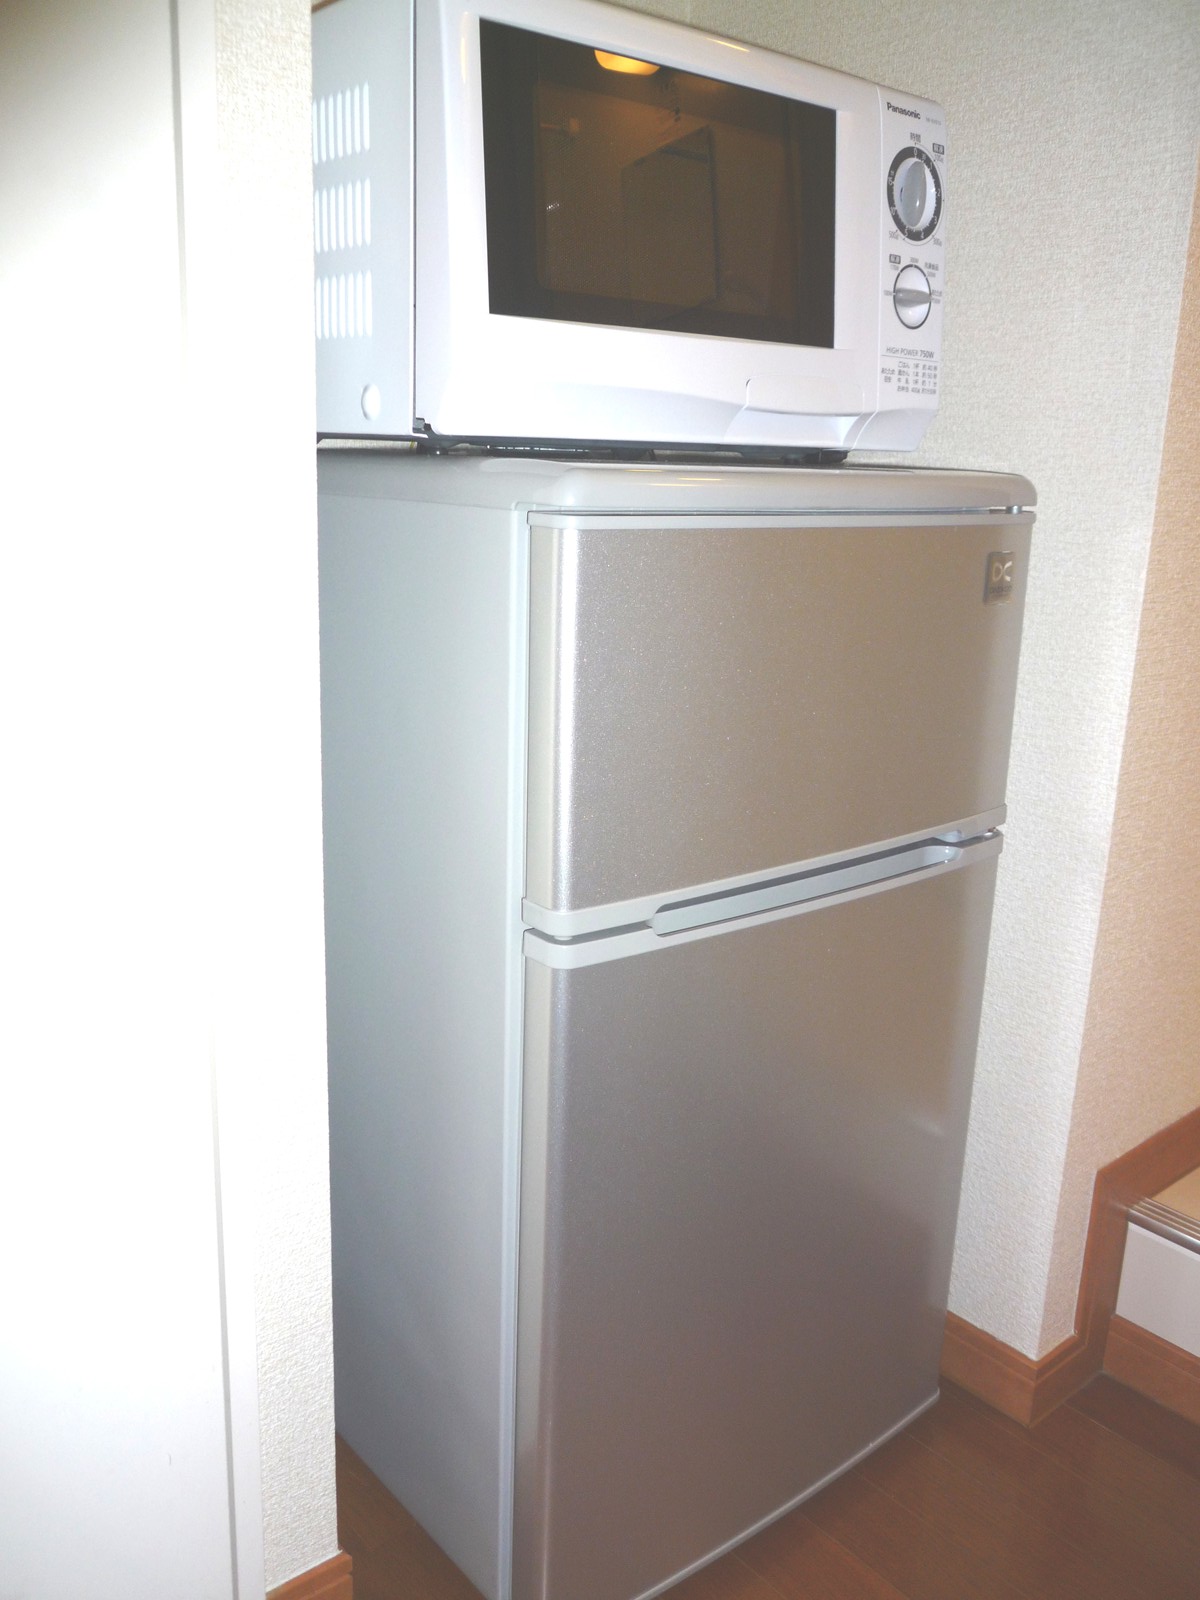 Other Equipment. microwave, Refrigerator comes with! 